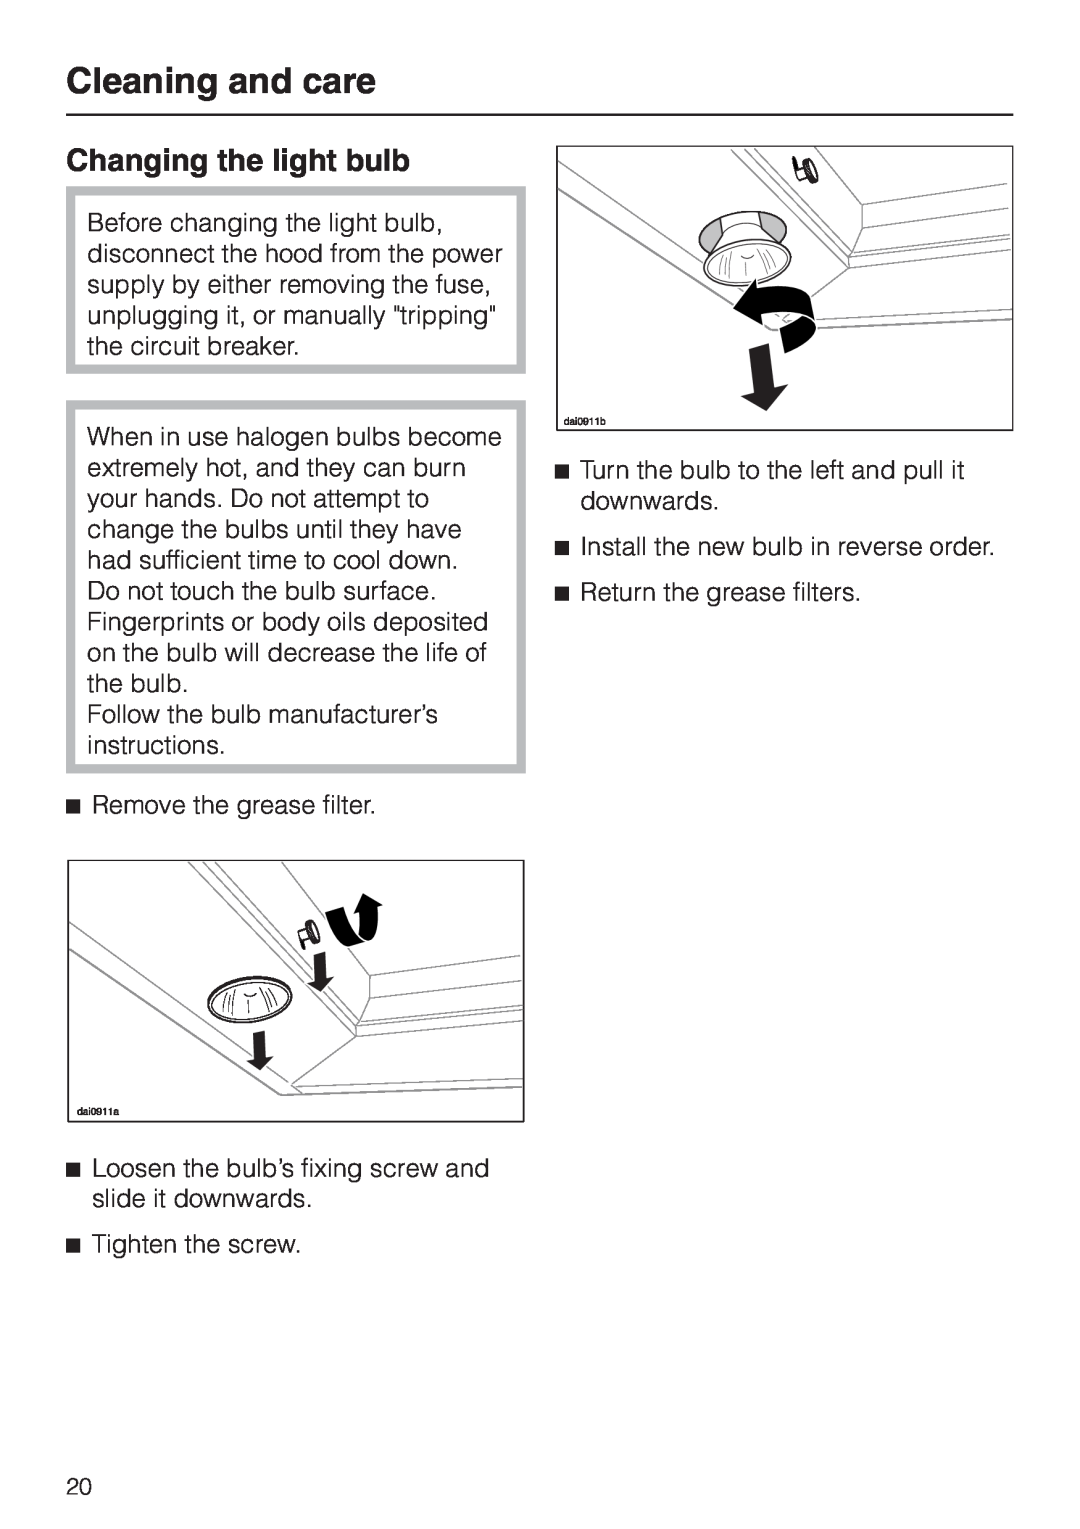 Miele DA362-110 installation instructions Changing the light bulb, Remove the grease filter, Cleaning and care 